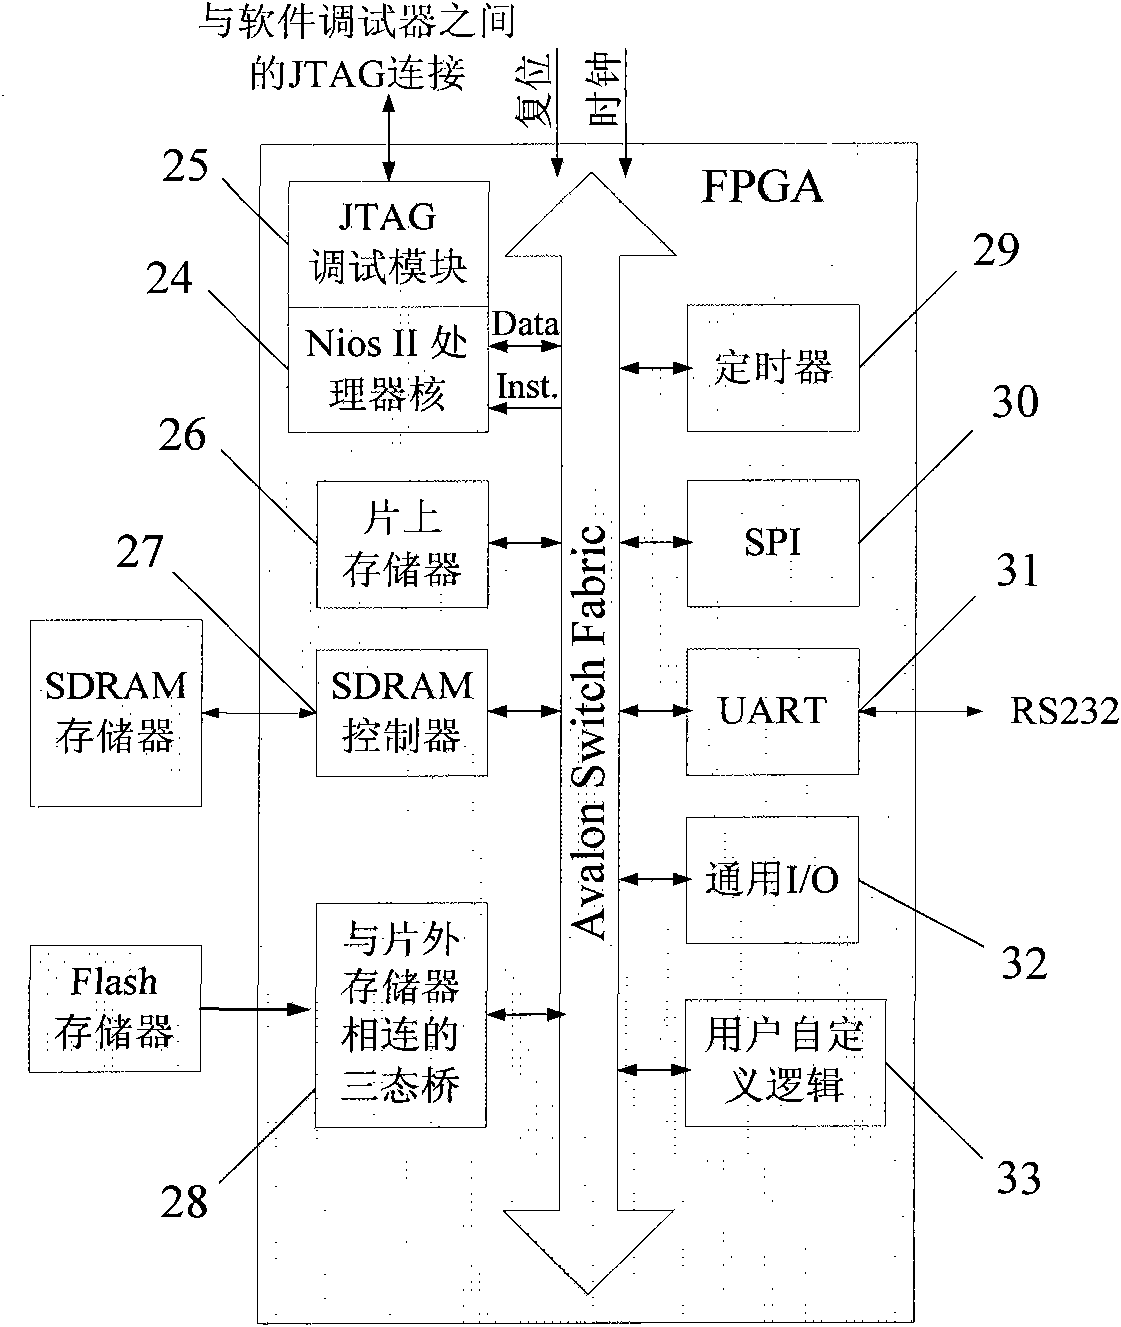 Water treatment project monitoring system based on wireless sensor network